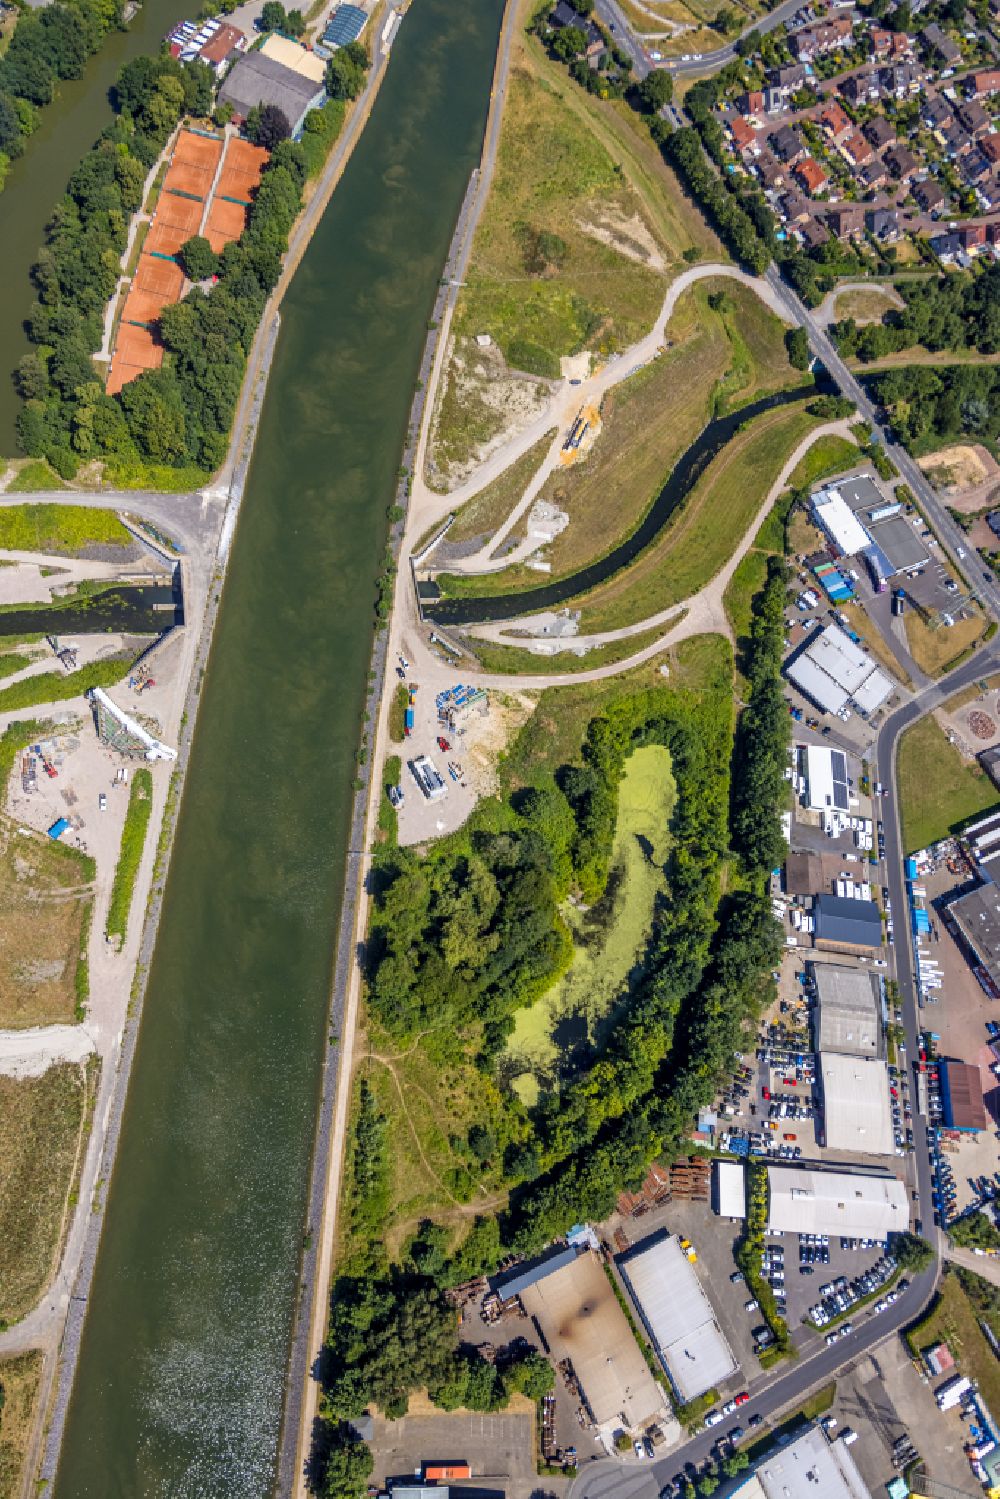 Aerial photograph Habinghorst - Construction site on the course of the river Emscher in Habinghorst in the Ruhr area in the state North Rhine-Westphalia, Germany